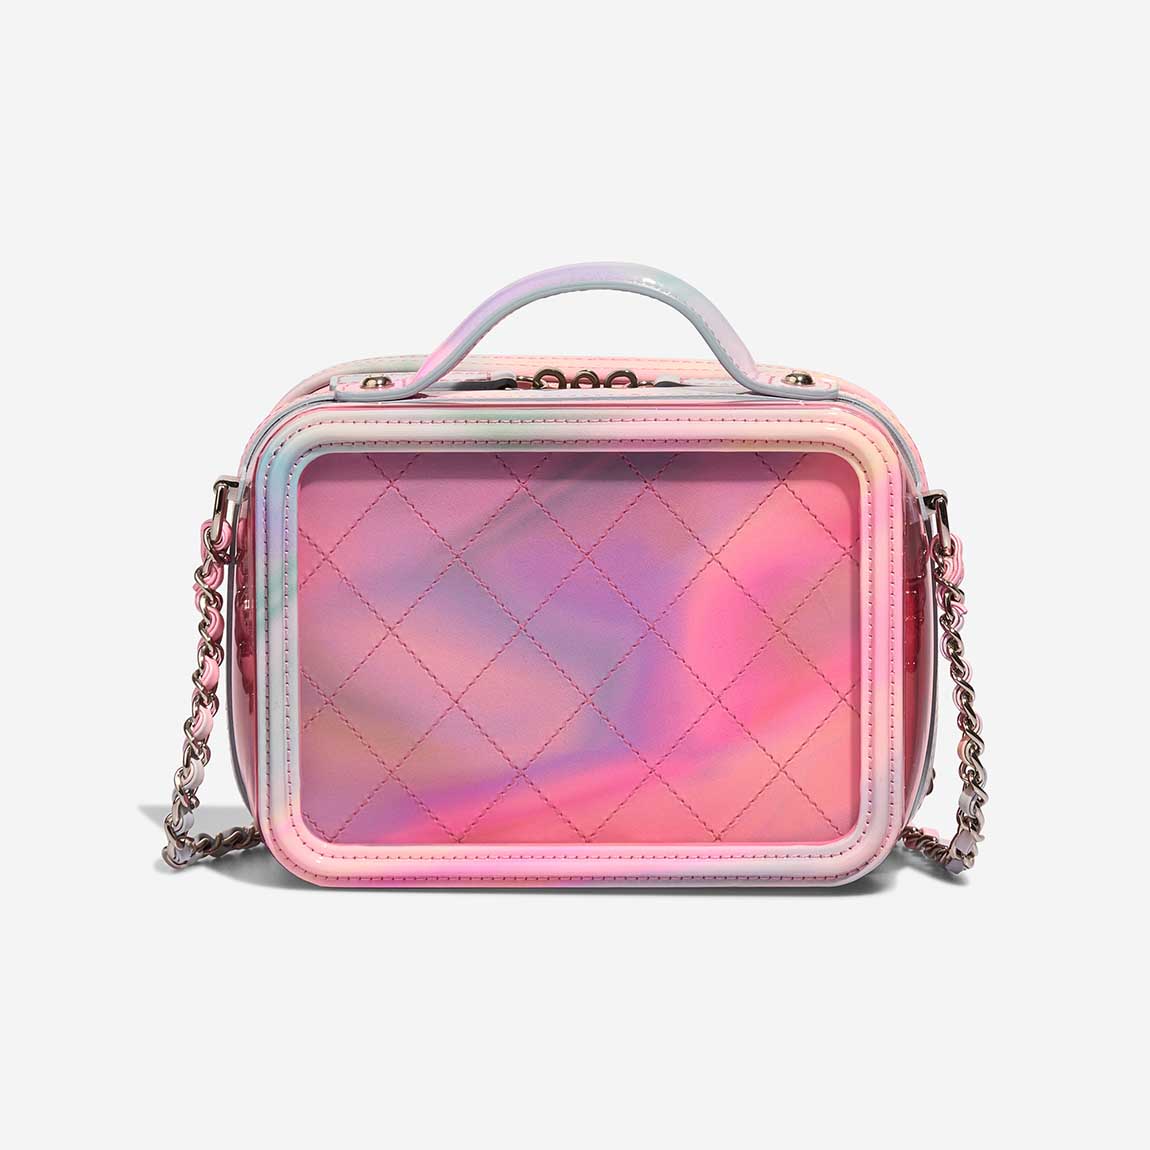 Chanel Vanity Small PVC Multicolour | Sell your designer bag